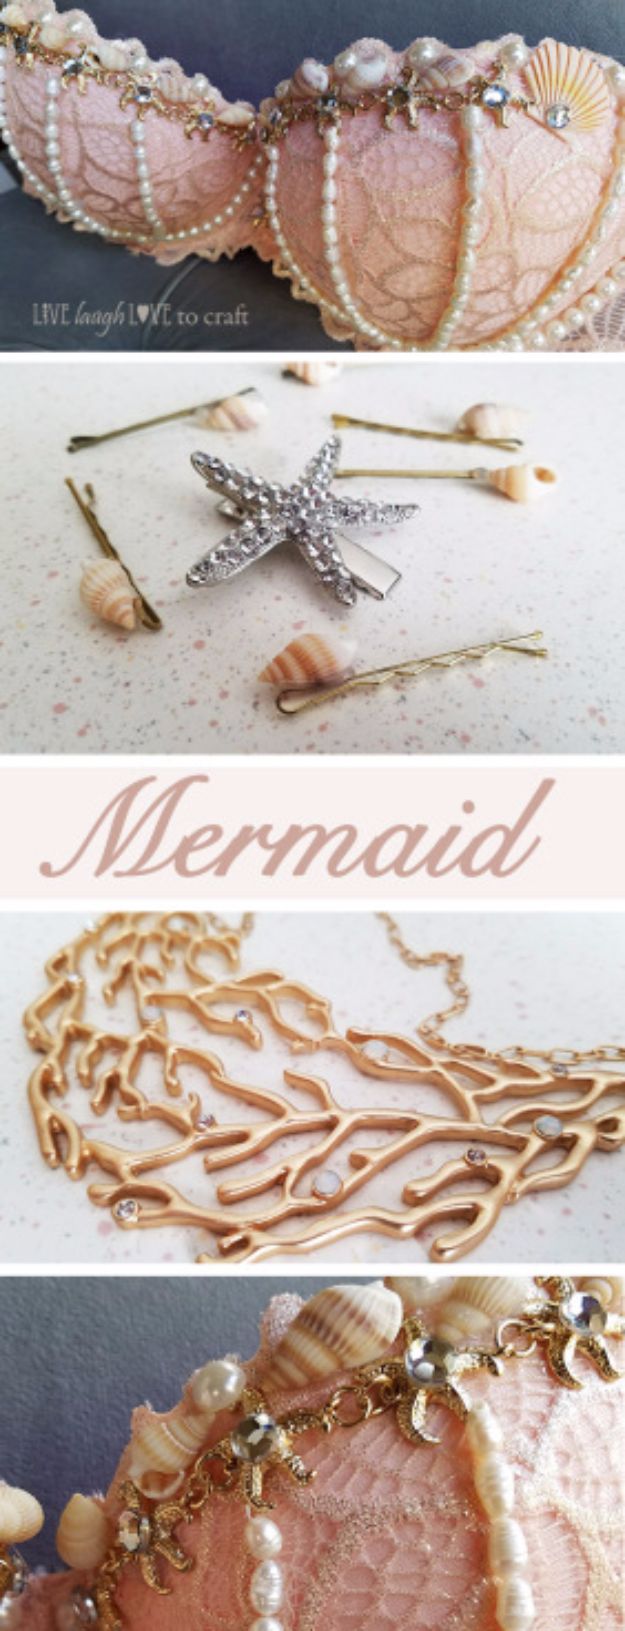 DIY Mermaid Crafts - Mermaid Costume And Accessories For Less - How To Make Room Decorations, Art Projects, Jewelry, and Makeup For Kids, Teens and Teenagers - Mermaid Costume Tutorials - Fun Clothes, Pillow Projects, Mermaid Tail Tutorial